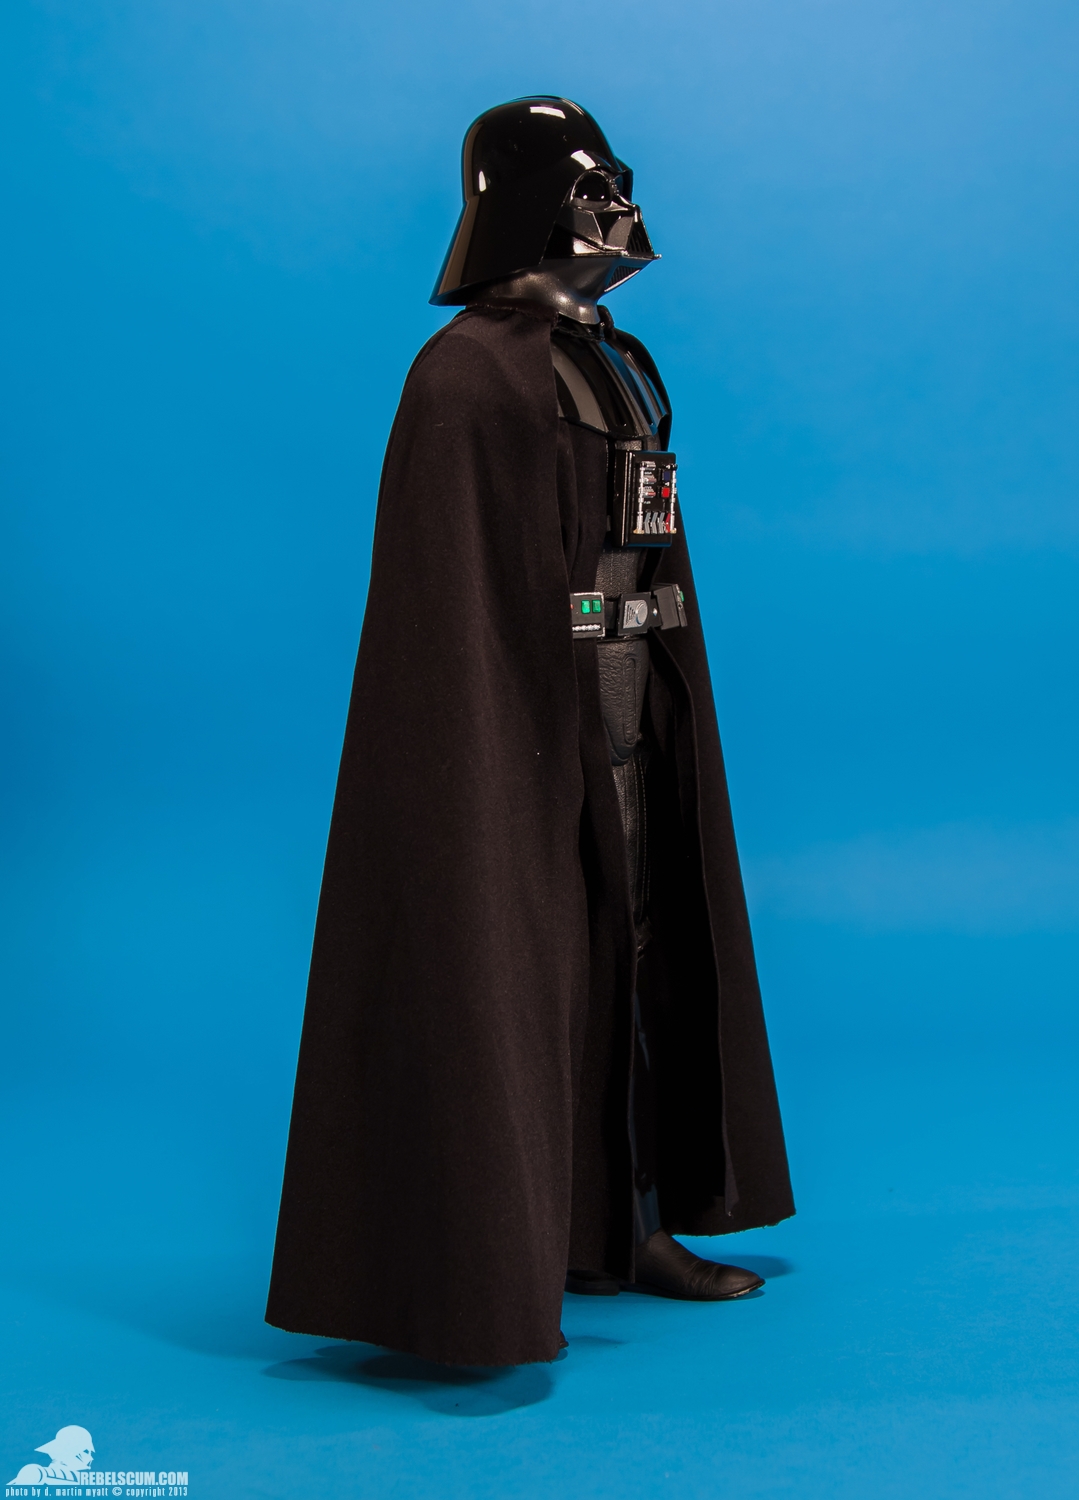 Darth-Vader-Return-Of-The-Jedi-Sixth-Scale-Sideshow-Collectibles-002.jpg